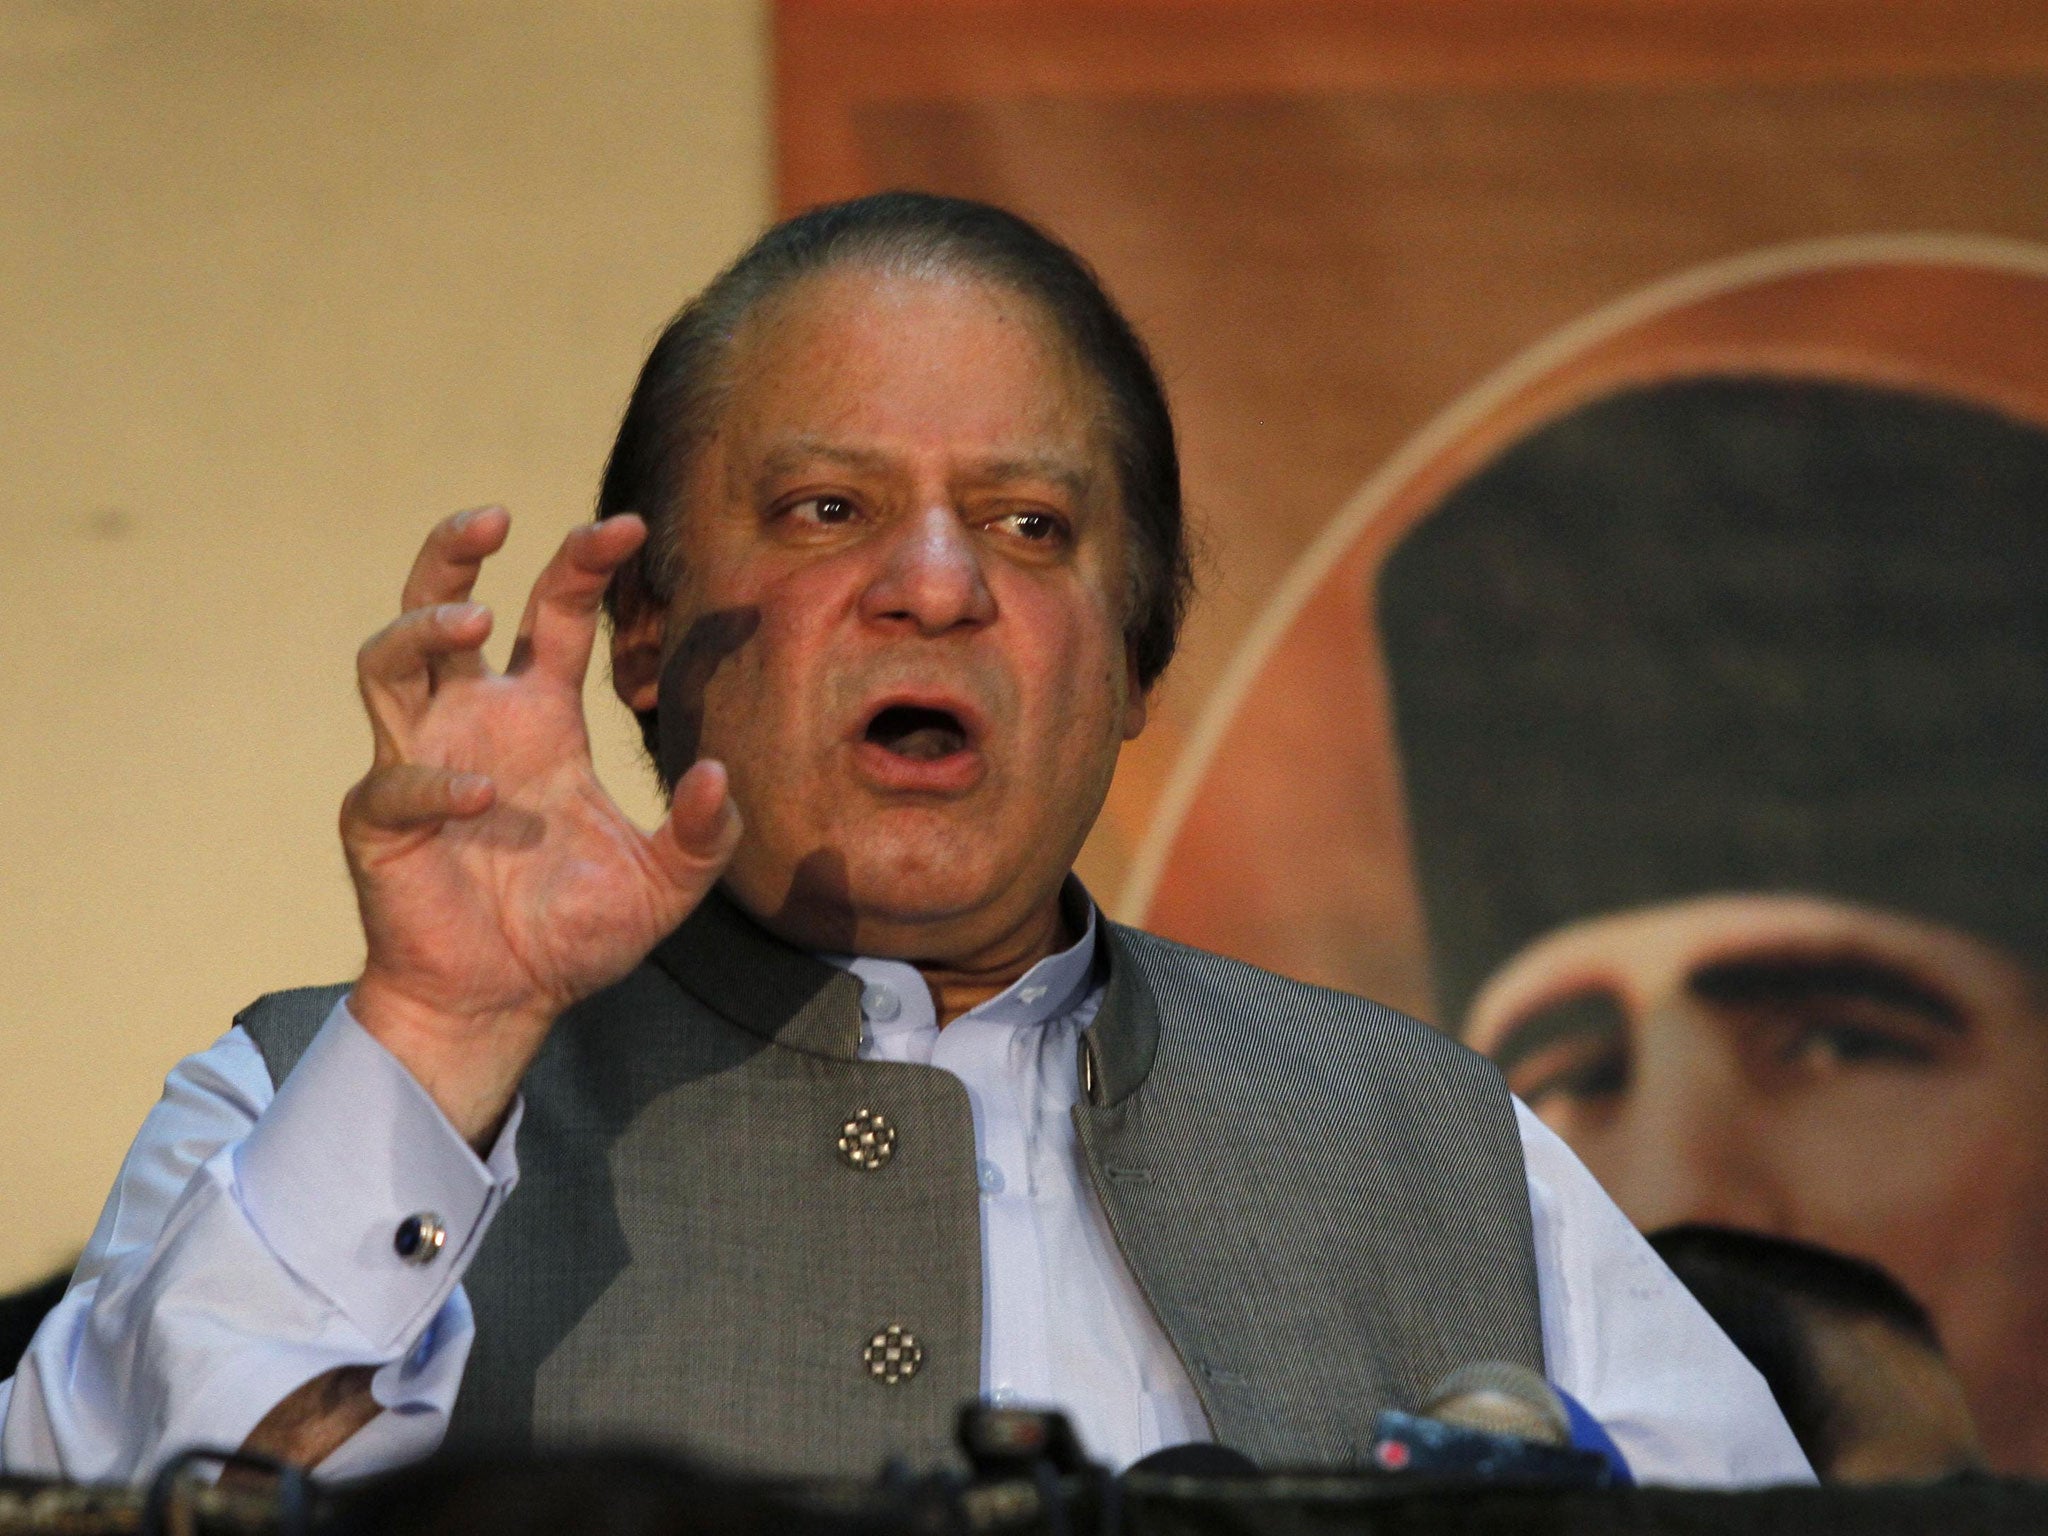 Nawaz Sharif's government originally said it wanted to reinstate the death penalty in a bid to crack down on criminals and Islamist militants